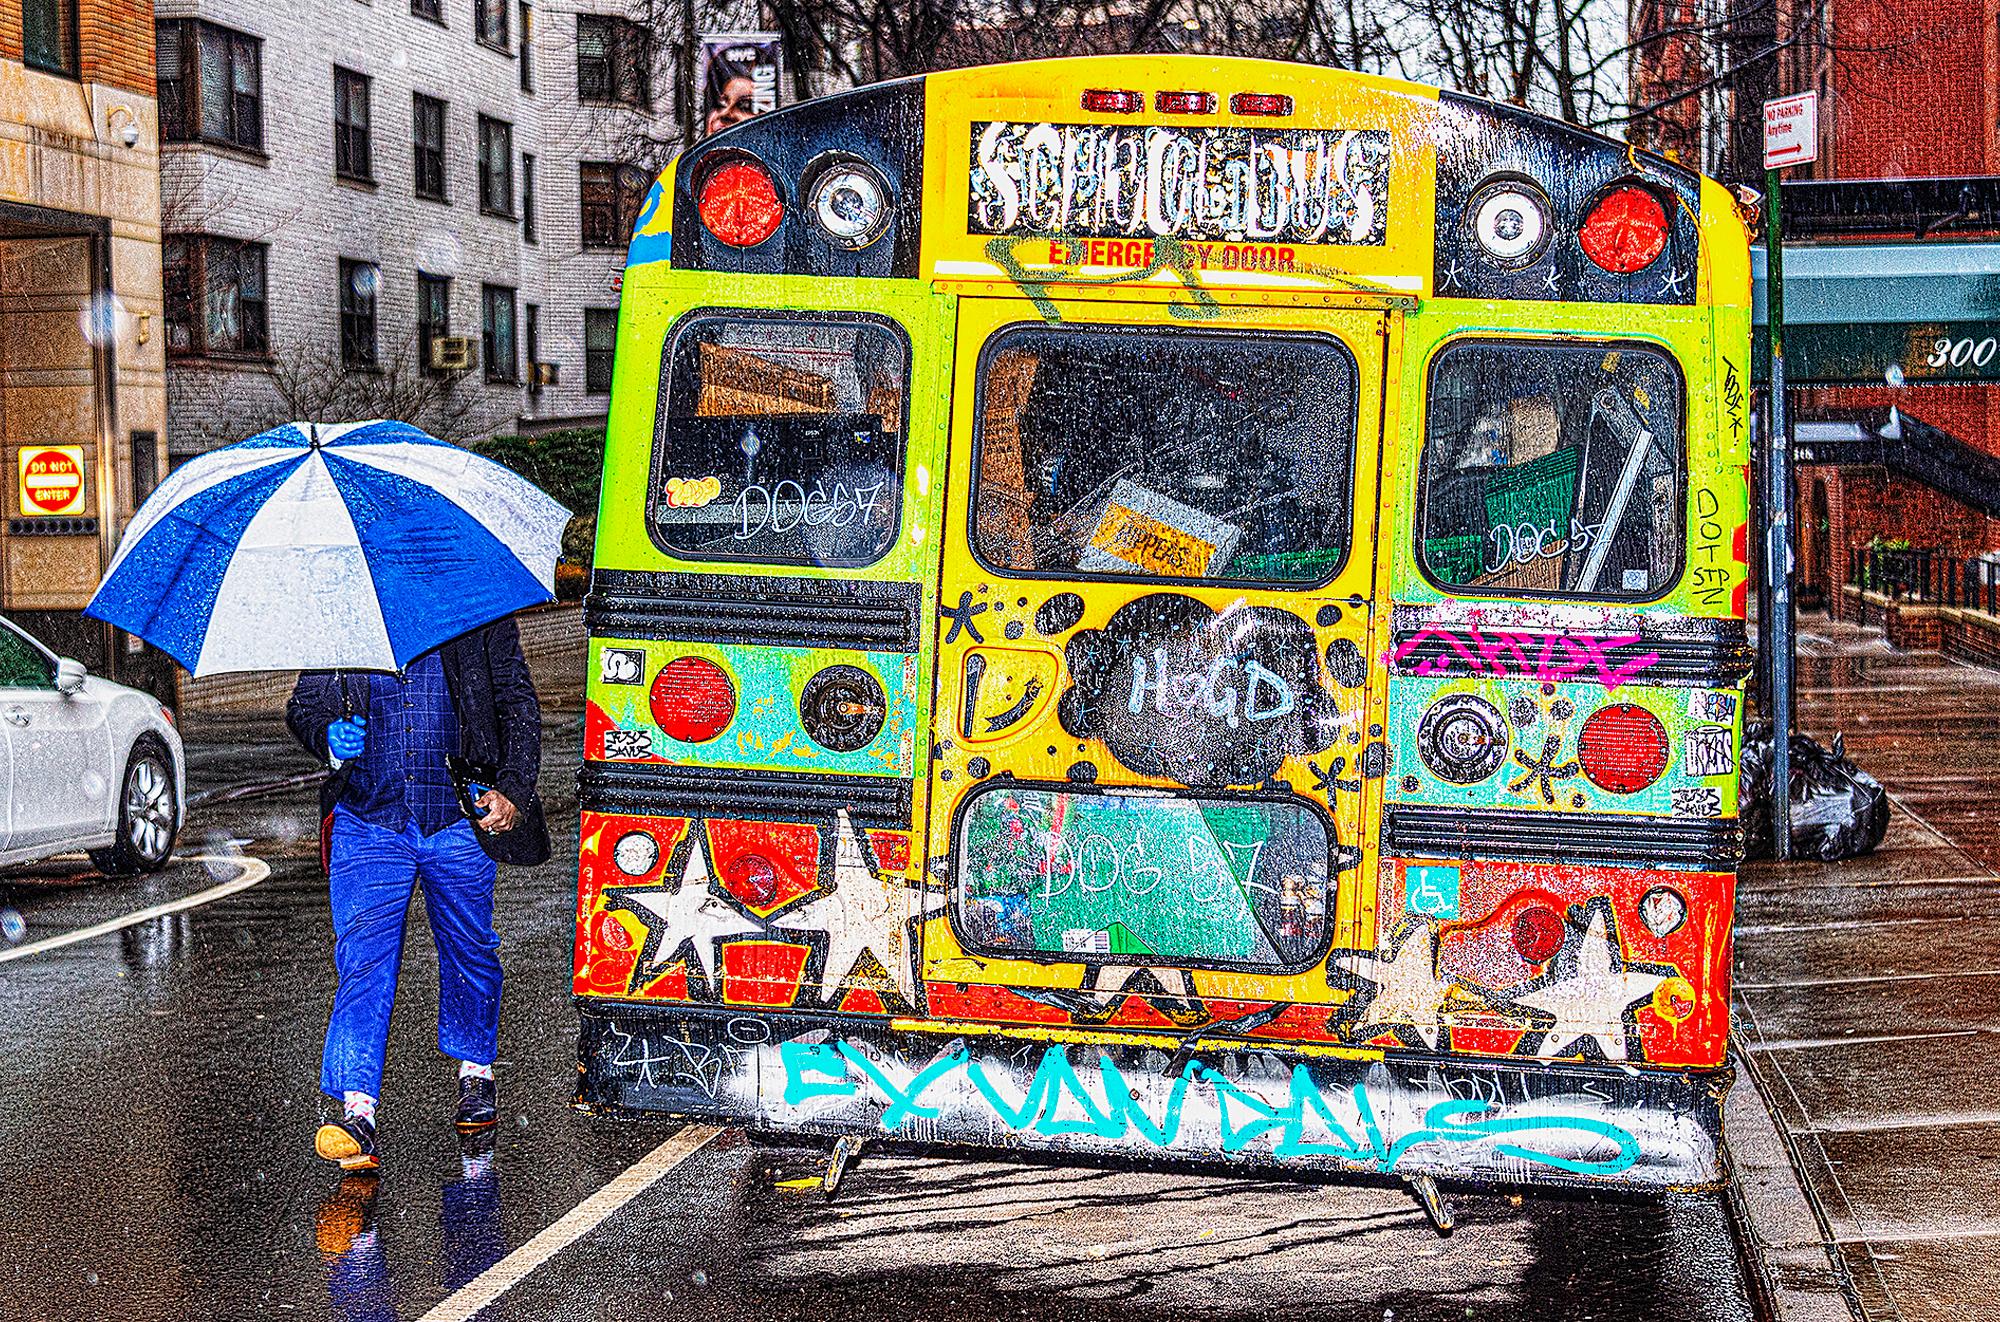 A Contrast of Two Art Styles - Graffiti Bus & Blue Umbrella on Rainy Day 